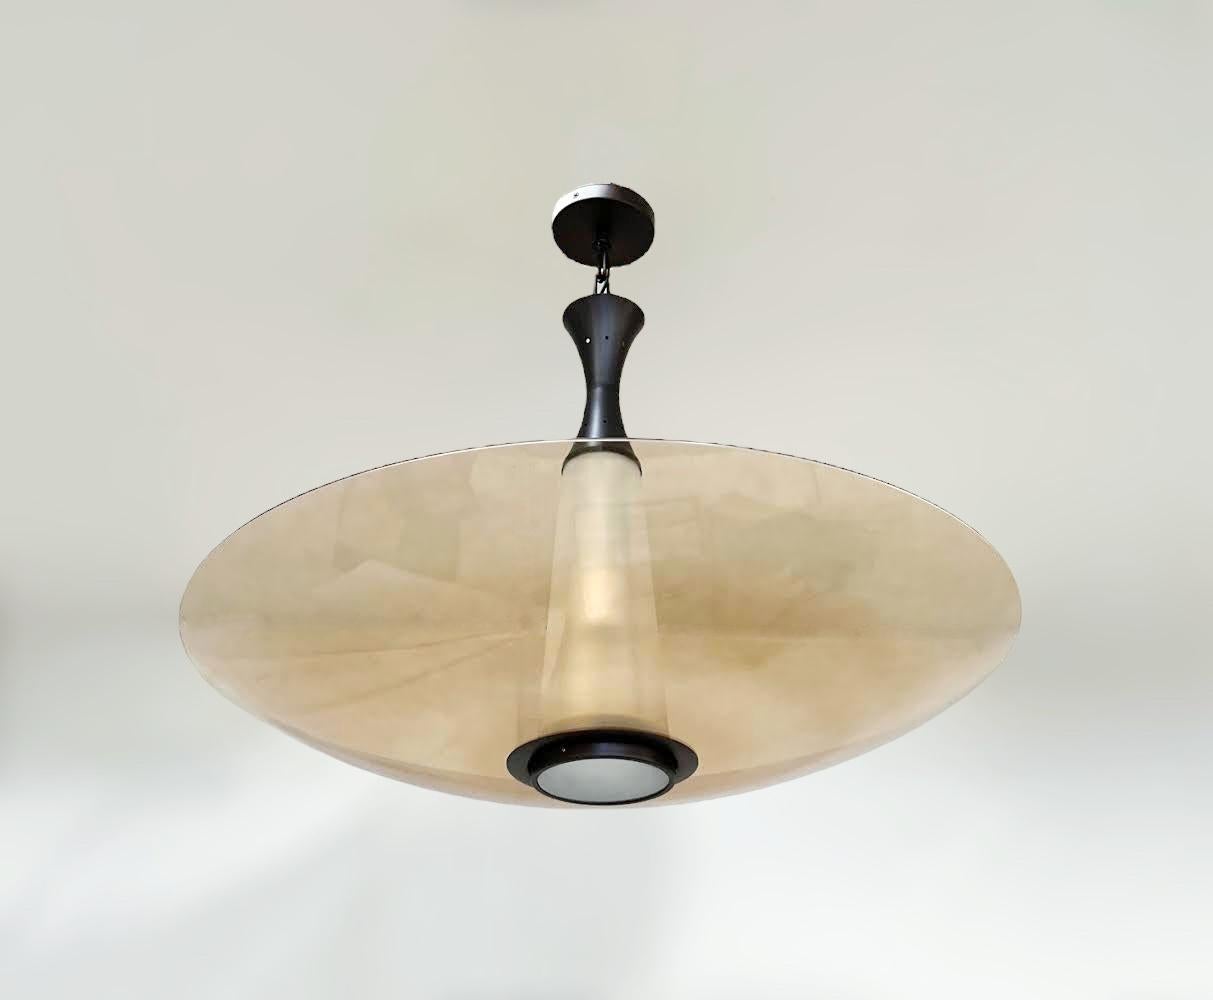 Italian modern chandelier or flushmount shown with smoked amber curved Murano glass shade with a beveled edge and frosted conical glass, mounted on dark bronzed hardware / Designed by Fabio Bergomi for Fabio Ltd / Made in Italy
1 light / E26 or E27